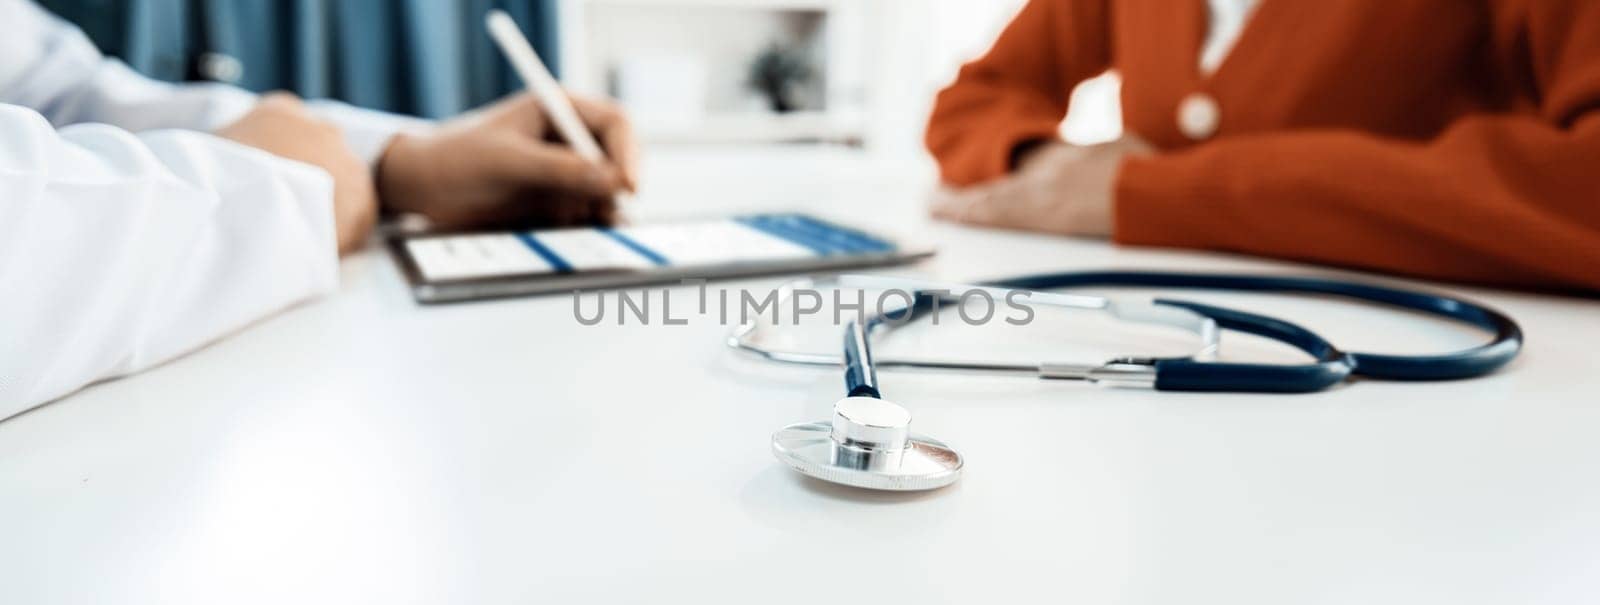 Focused stethoscope on office desk with blurred background. Rigid by biancoblue